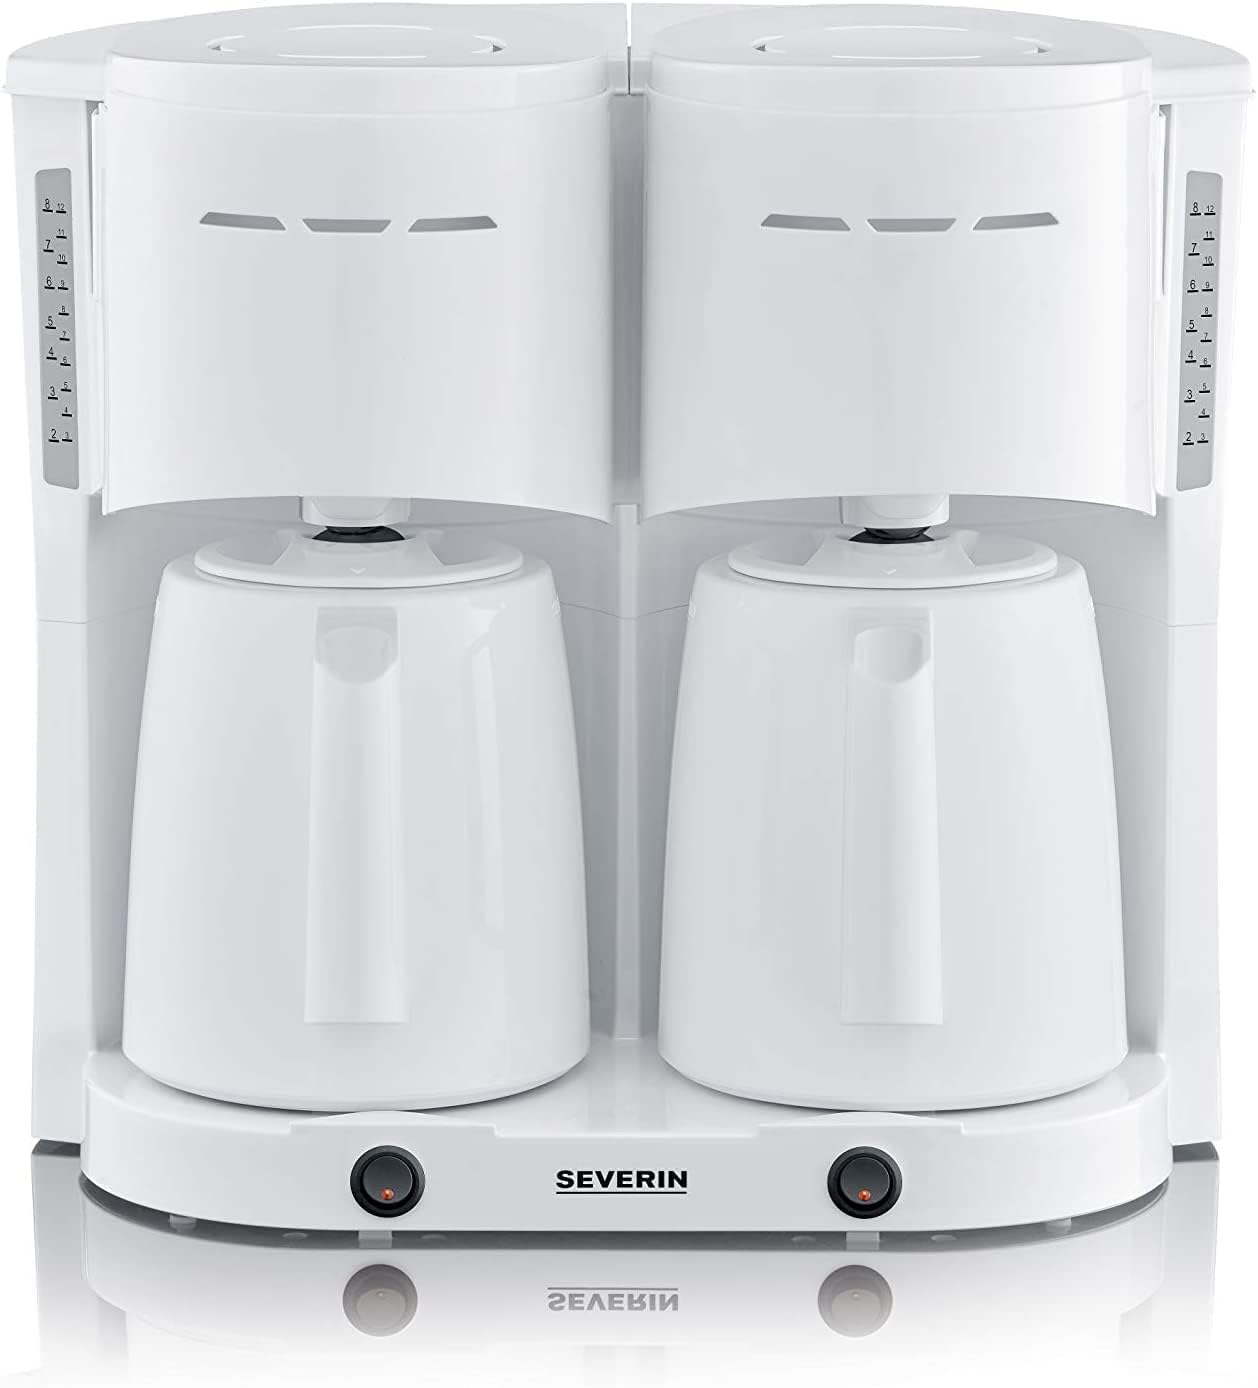 SEVERIN KA 9314 Duo Filter Coffee Machine with Thermal Jug, Coffee Machine for up to 16 Cups, Attractive Filter Machine with 2 Insulated Jugs, White